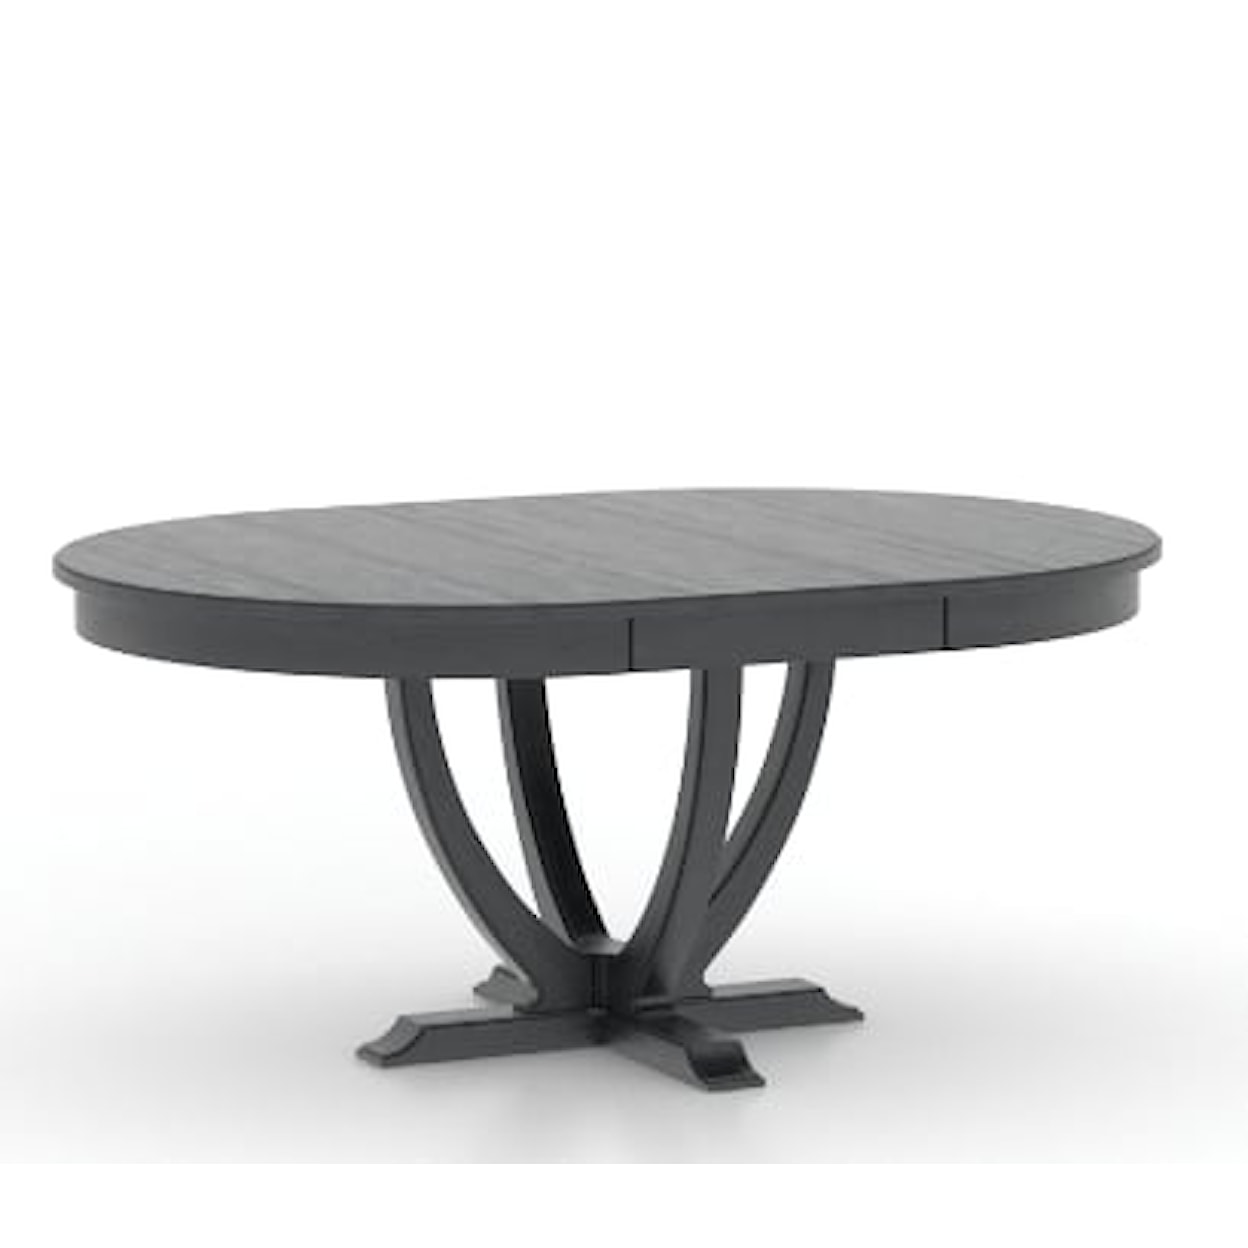 Canadel Canadel Oval Dining Table